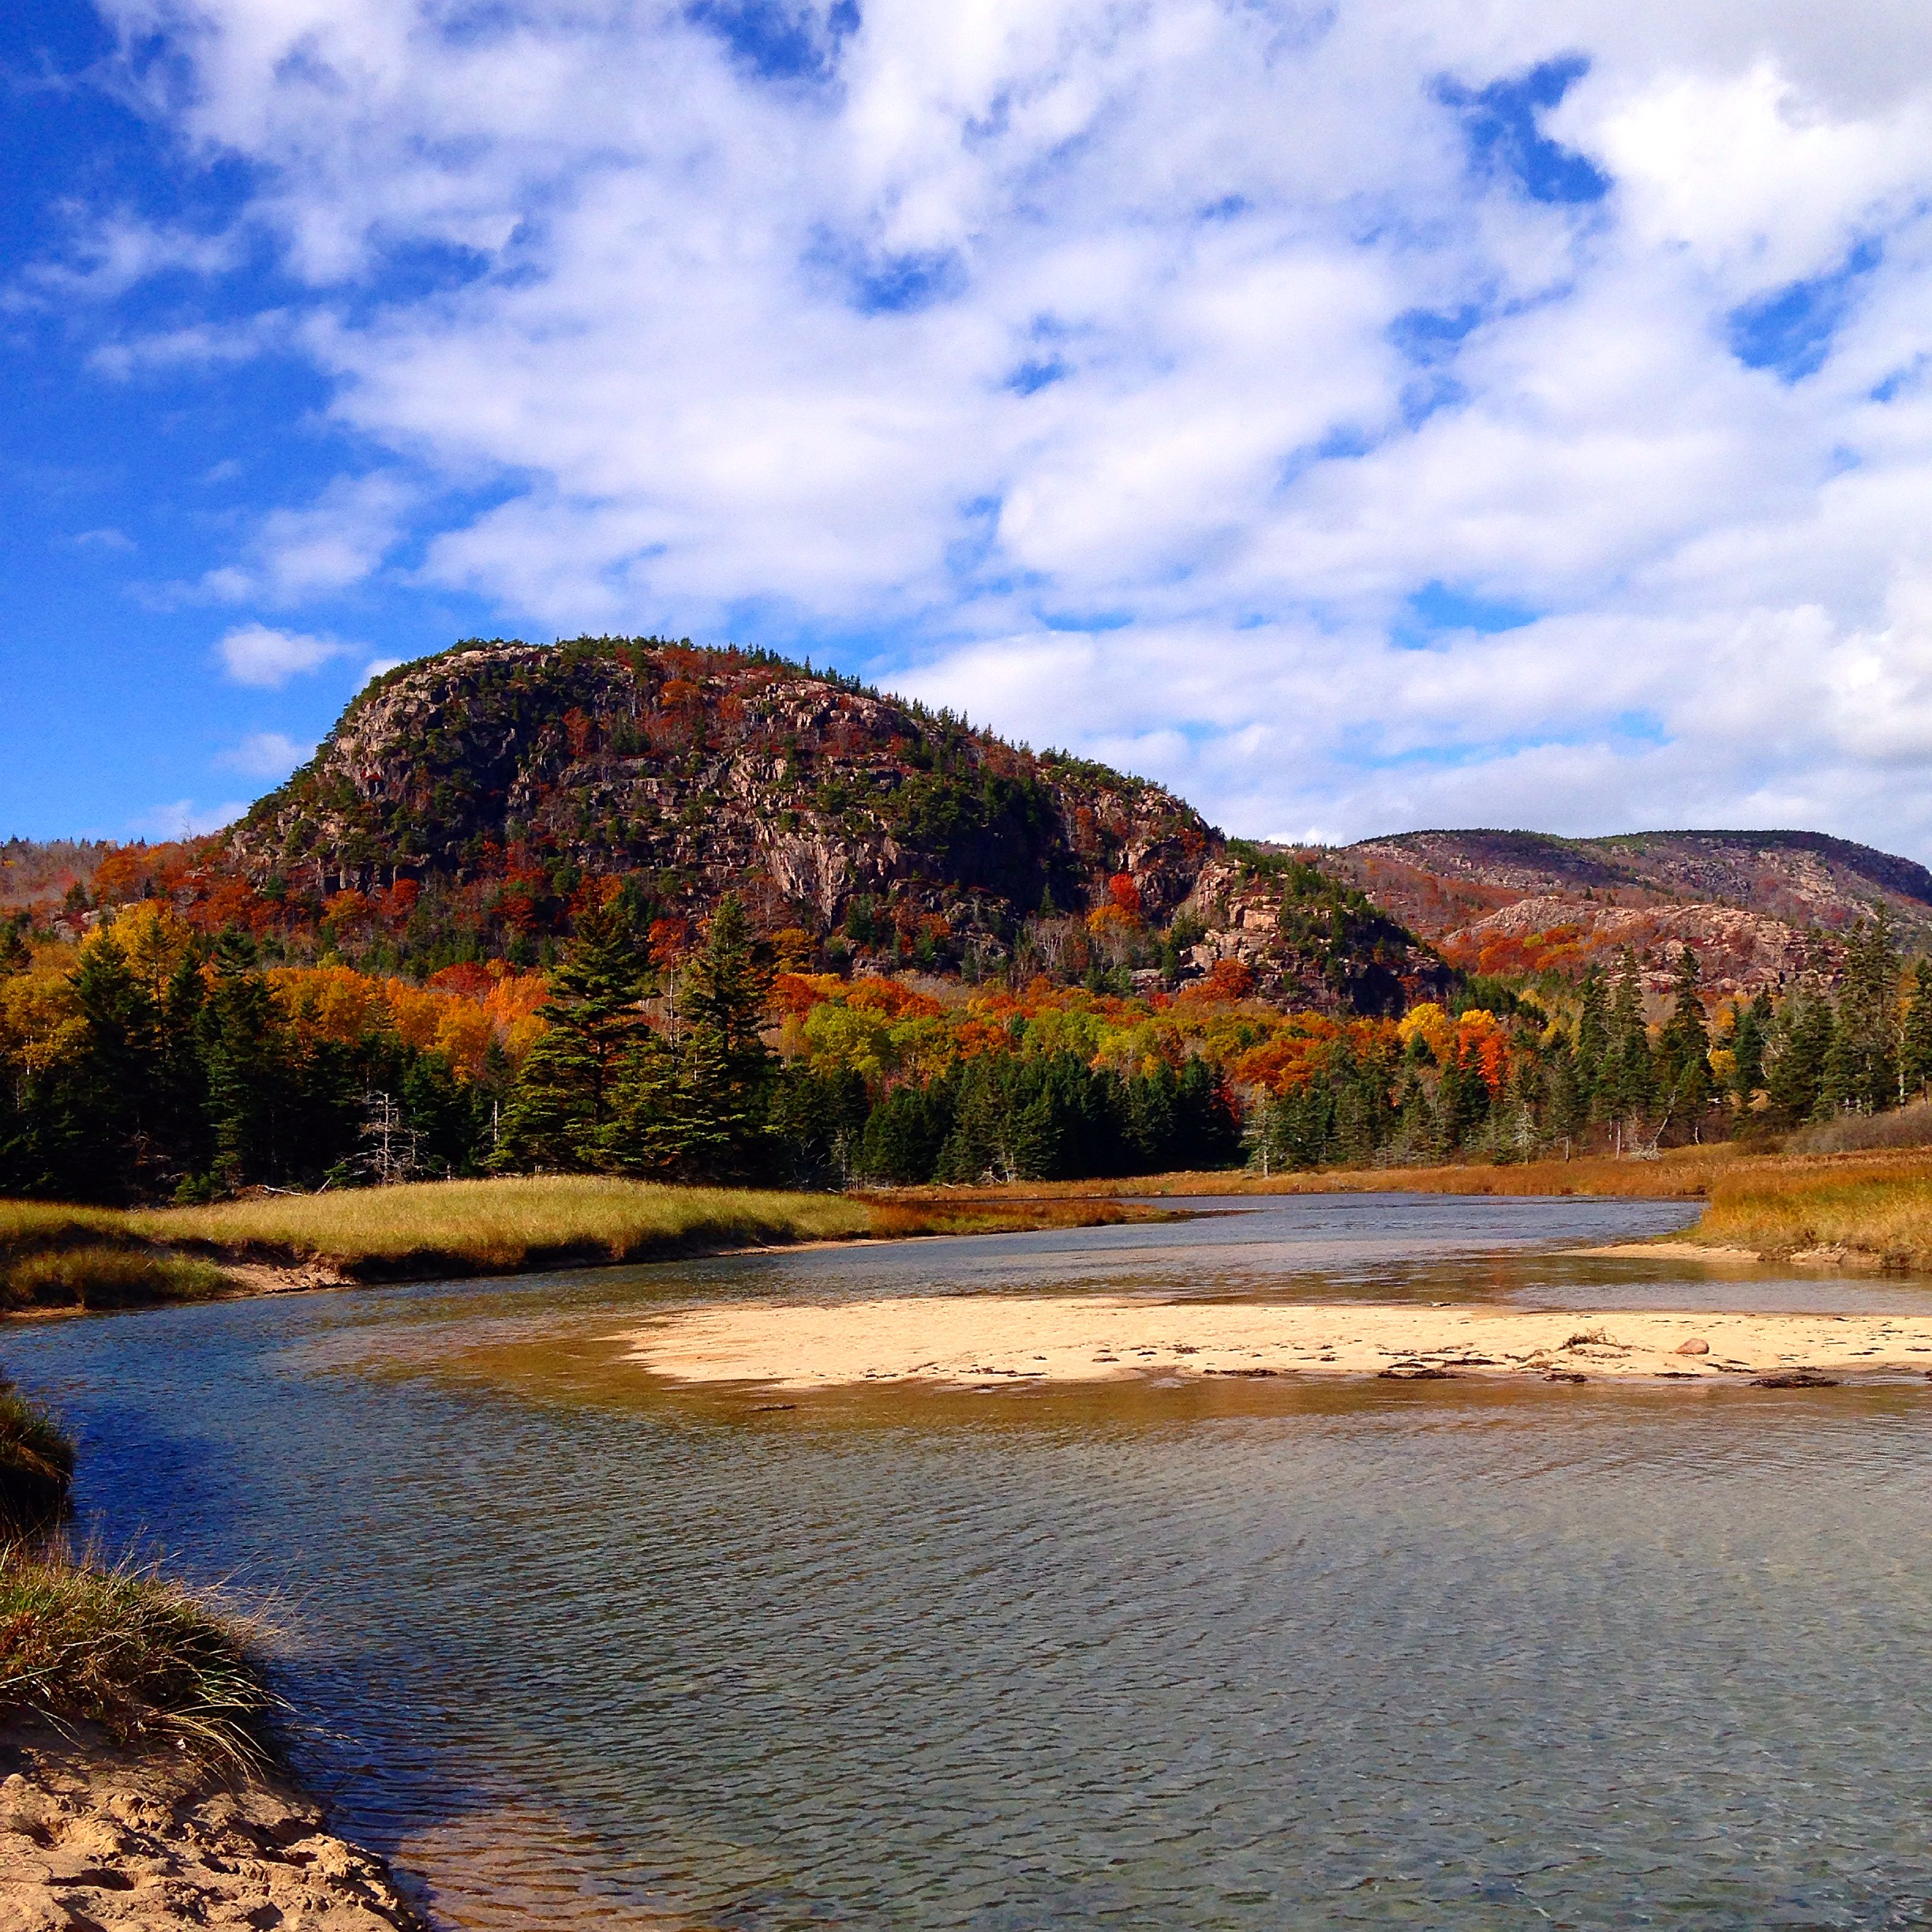 Experience Fall to Its Fullest in Bar Harbor: Leaf-peeping, Events and Shopping